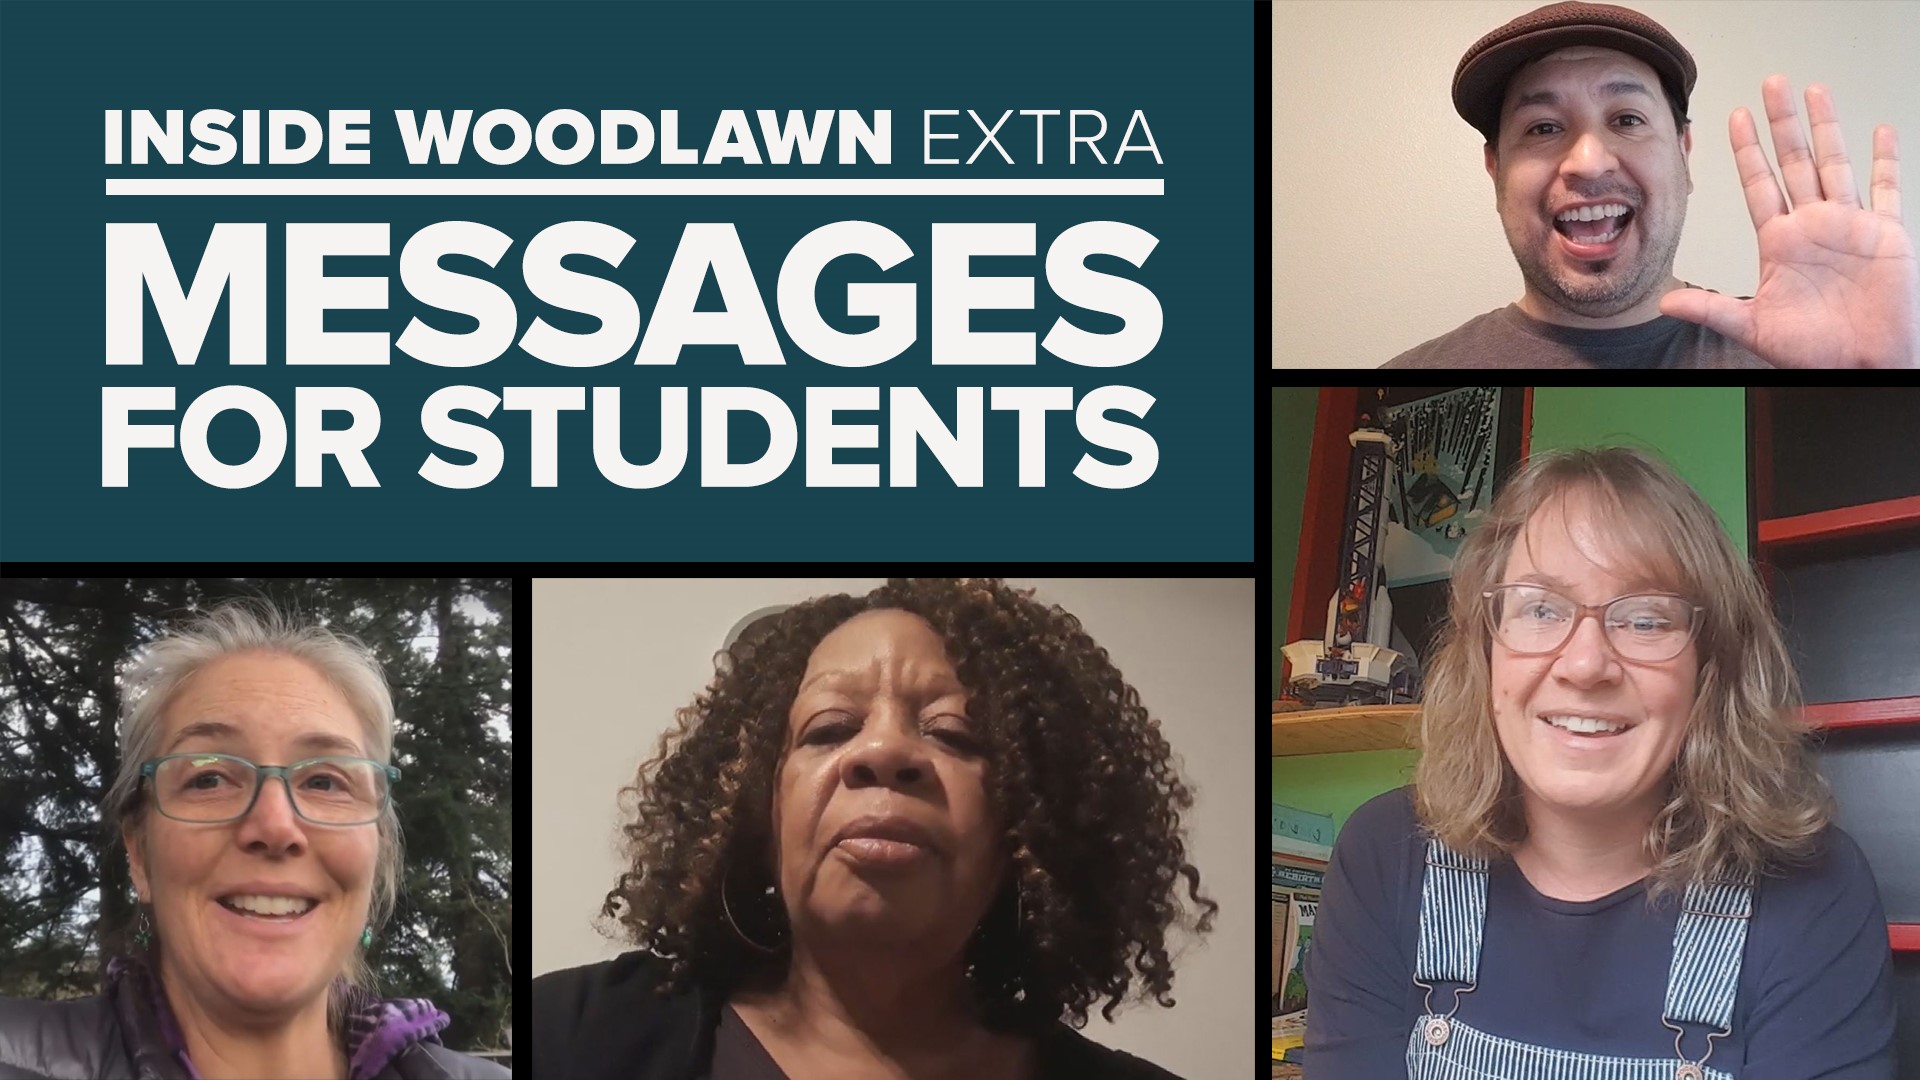 Teachers and staff at Woodlawn Elementary are missing their students as the COVID-19 pandemic keeps them apart. Here are the messages they're sending.